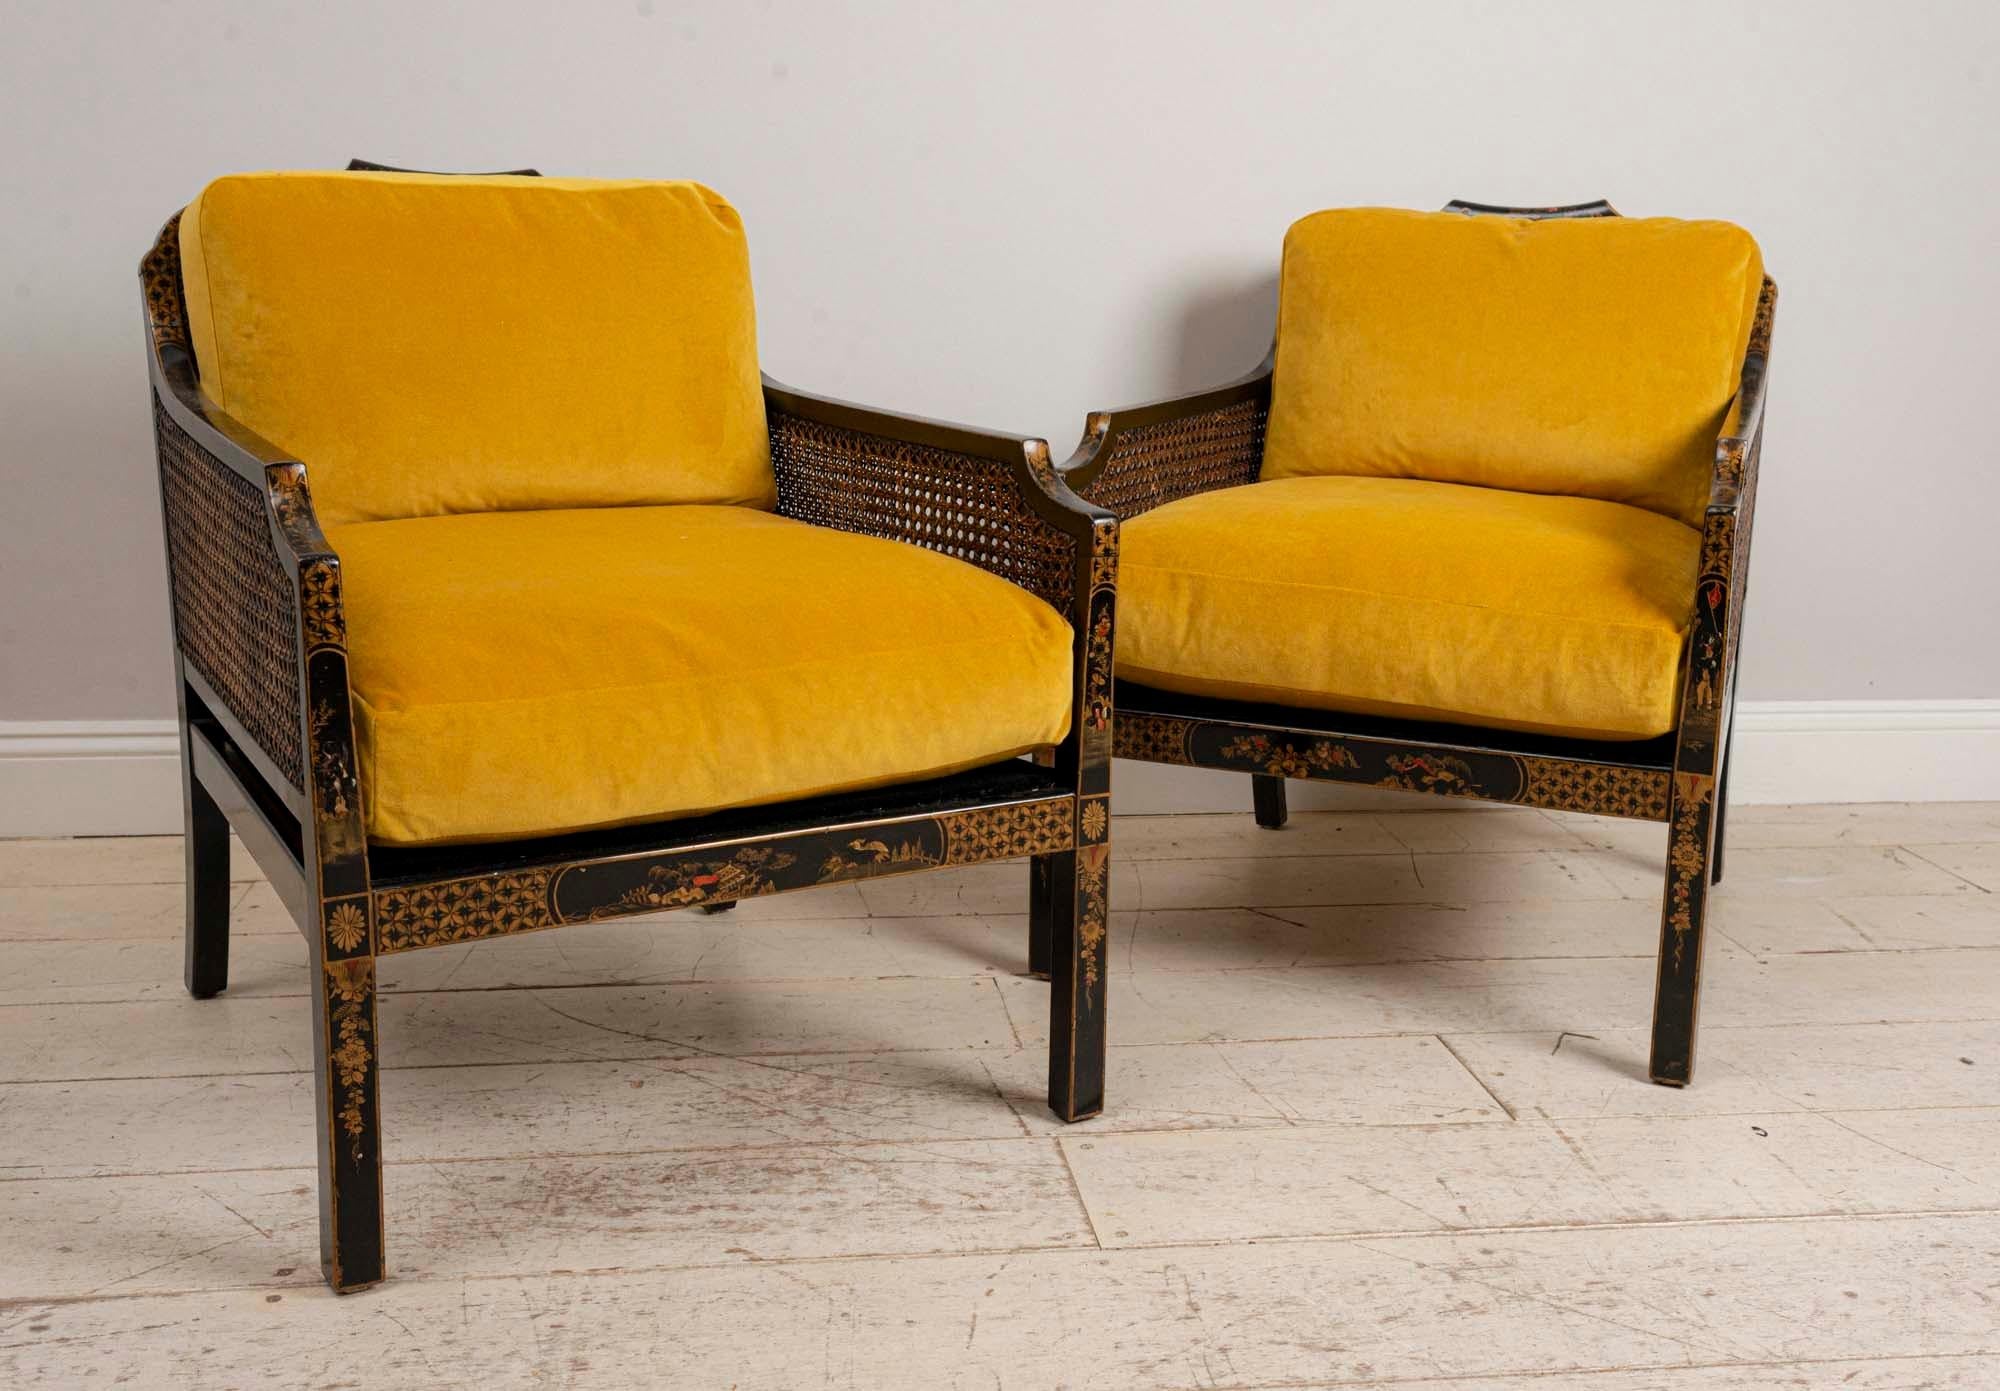 Pair of English 1920s Japanned armchairs with chinoiserie decoration, caned sides and back.
This chic pair of armchairs have wonderful saffron velvet upholstery with an additional small cushion for support. The armchairs would work well in both a